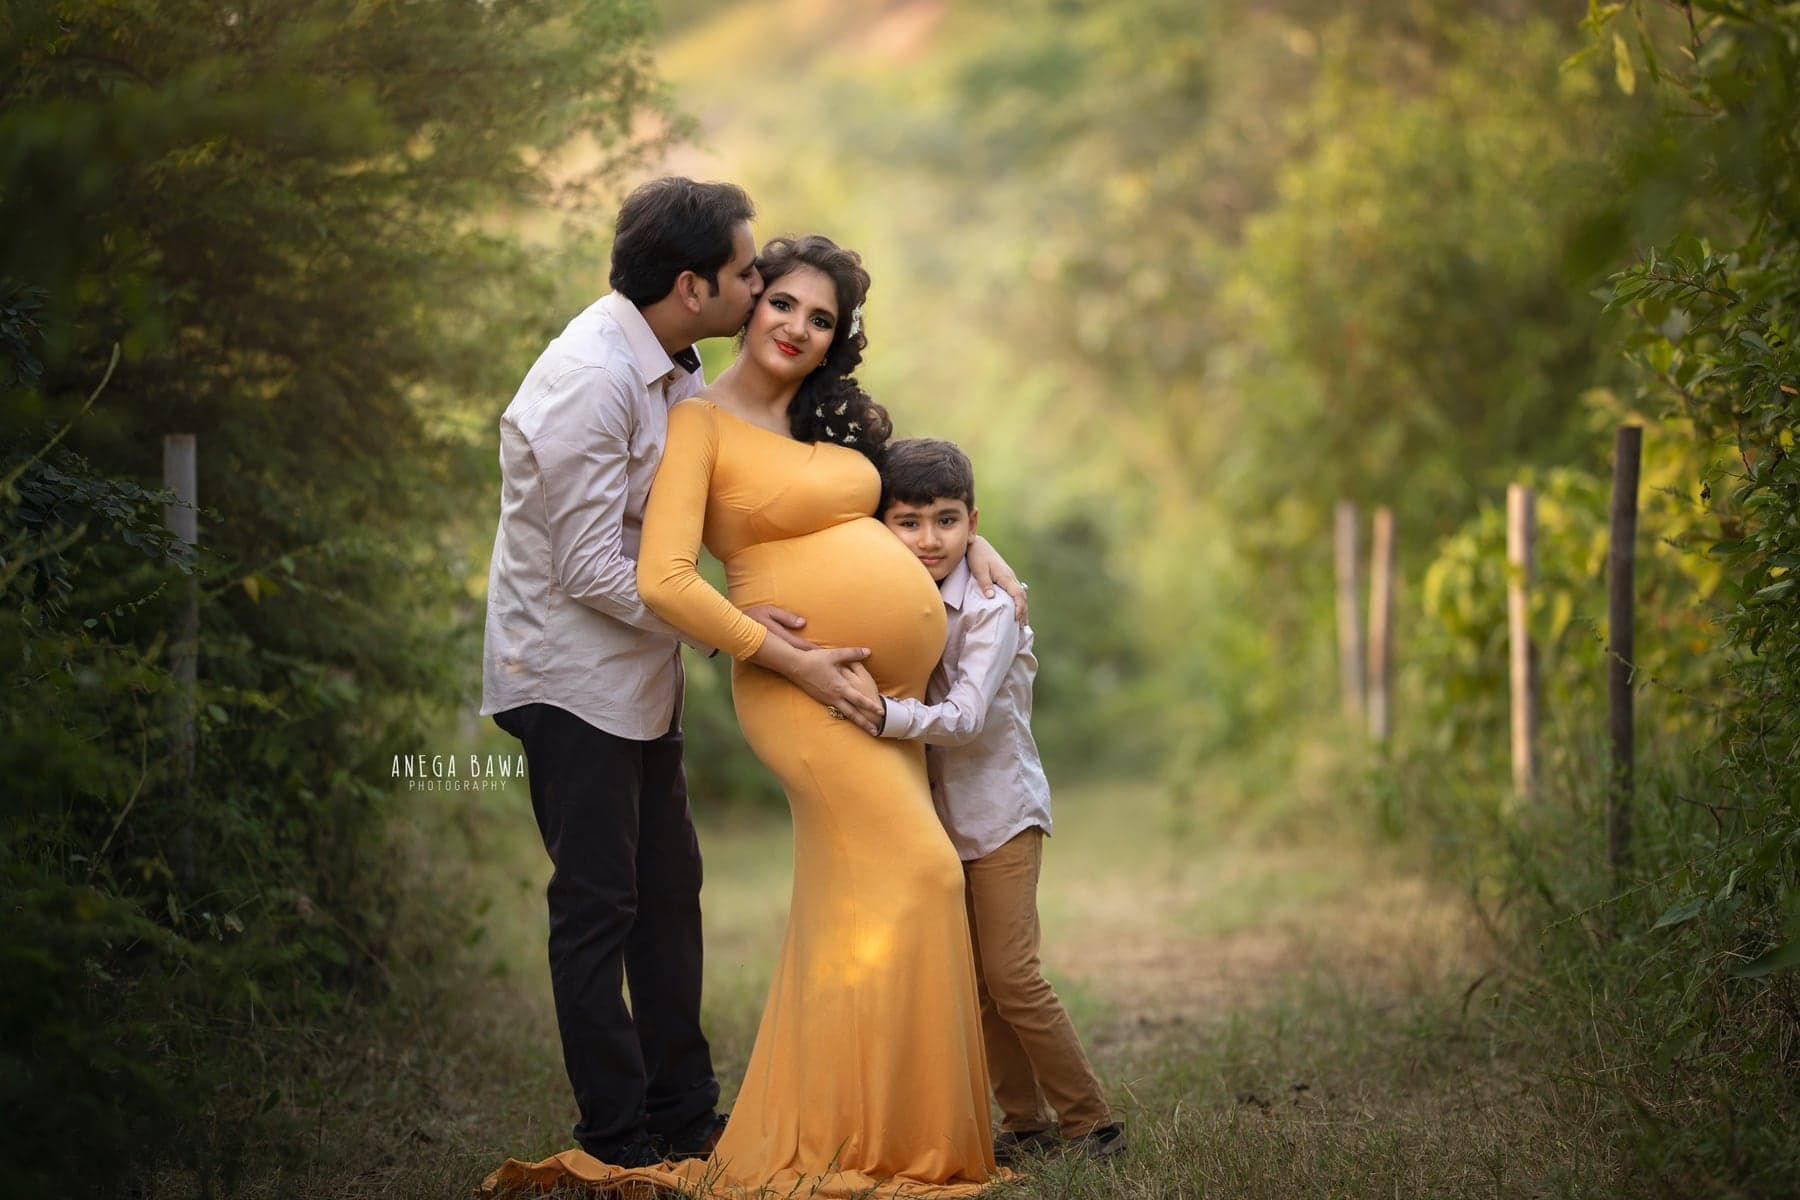 35 Maternity Poses Every Mom-To-Be Needs At Photoshoot | Maternity  photography poses, Maternity photoshoot poses, Pregnancy photoshoot